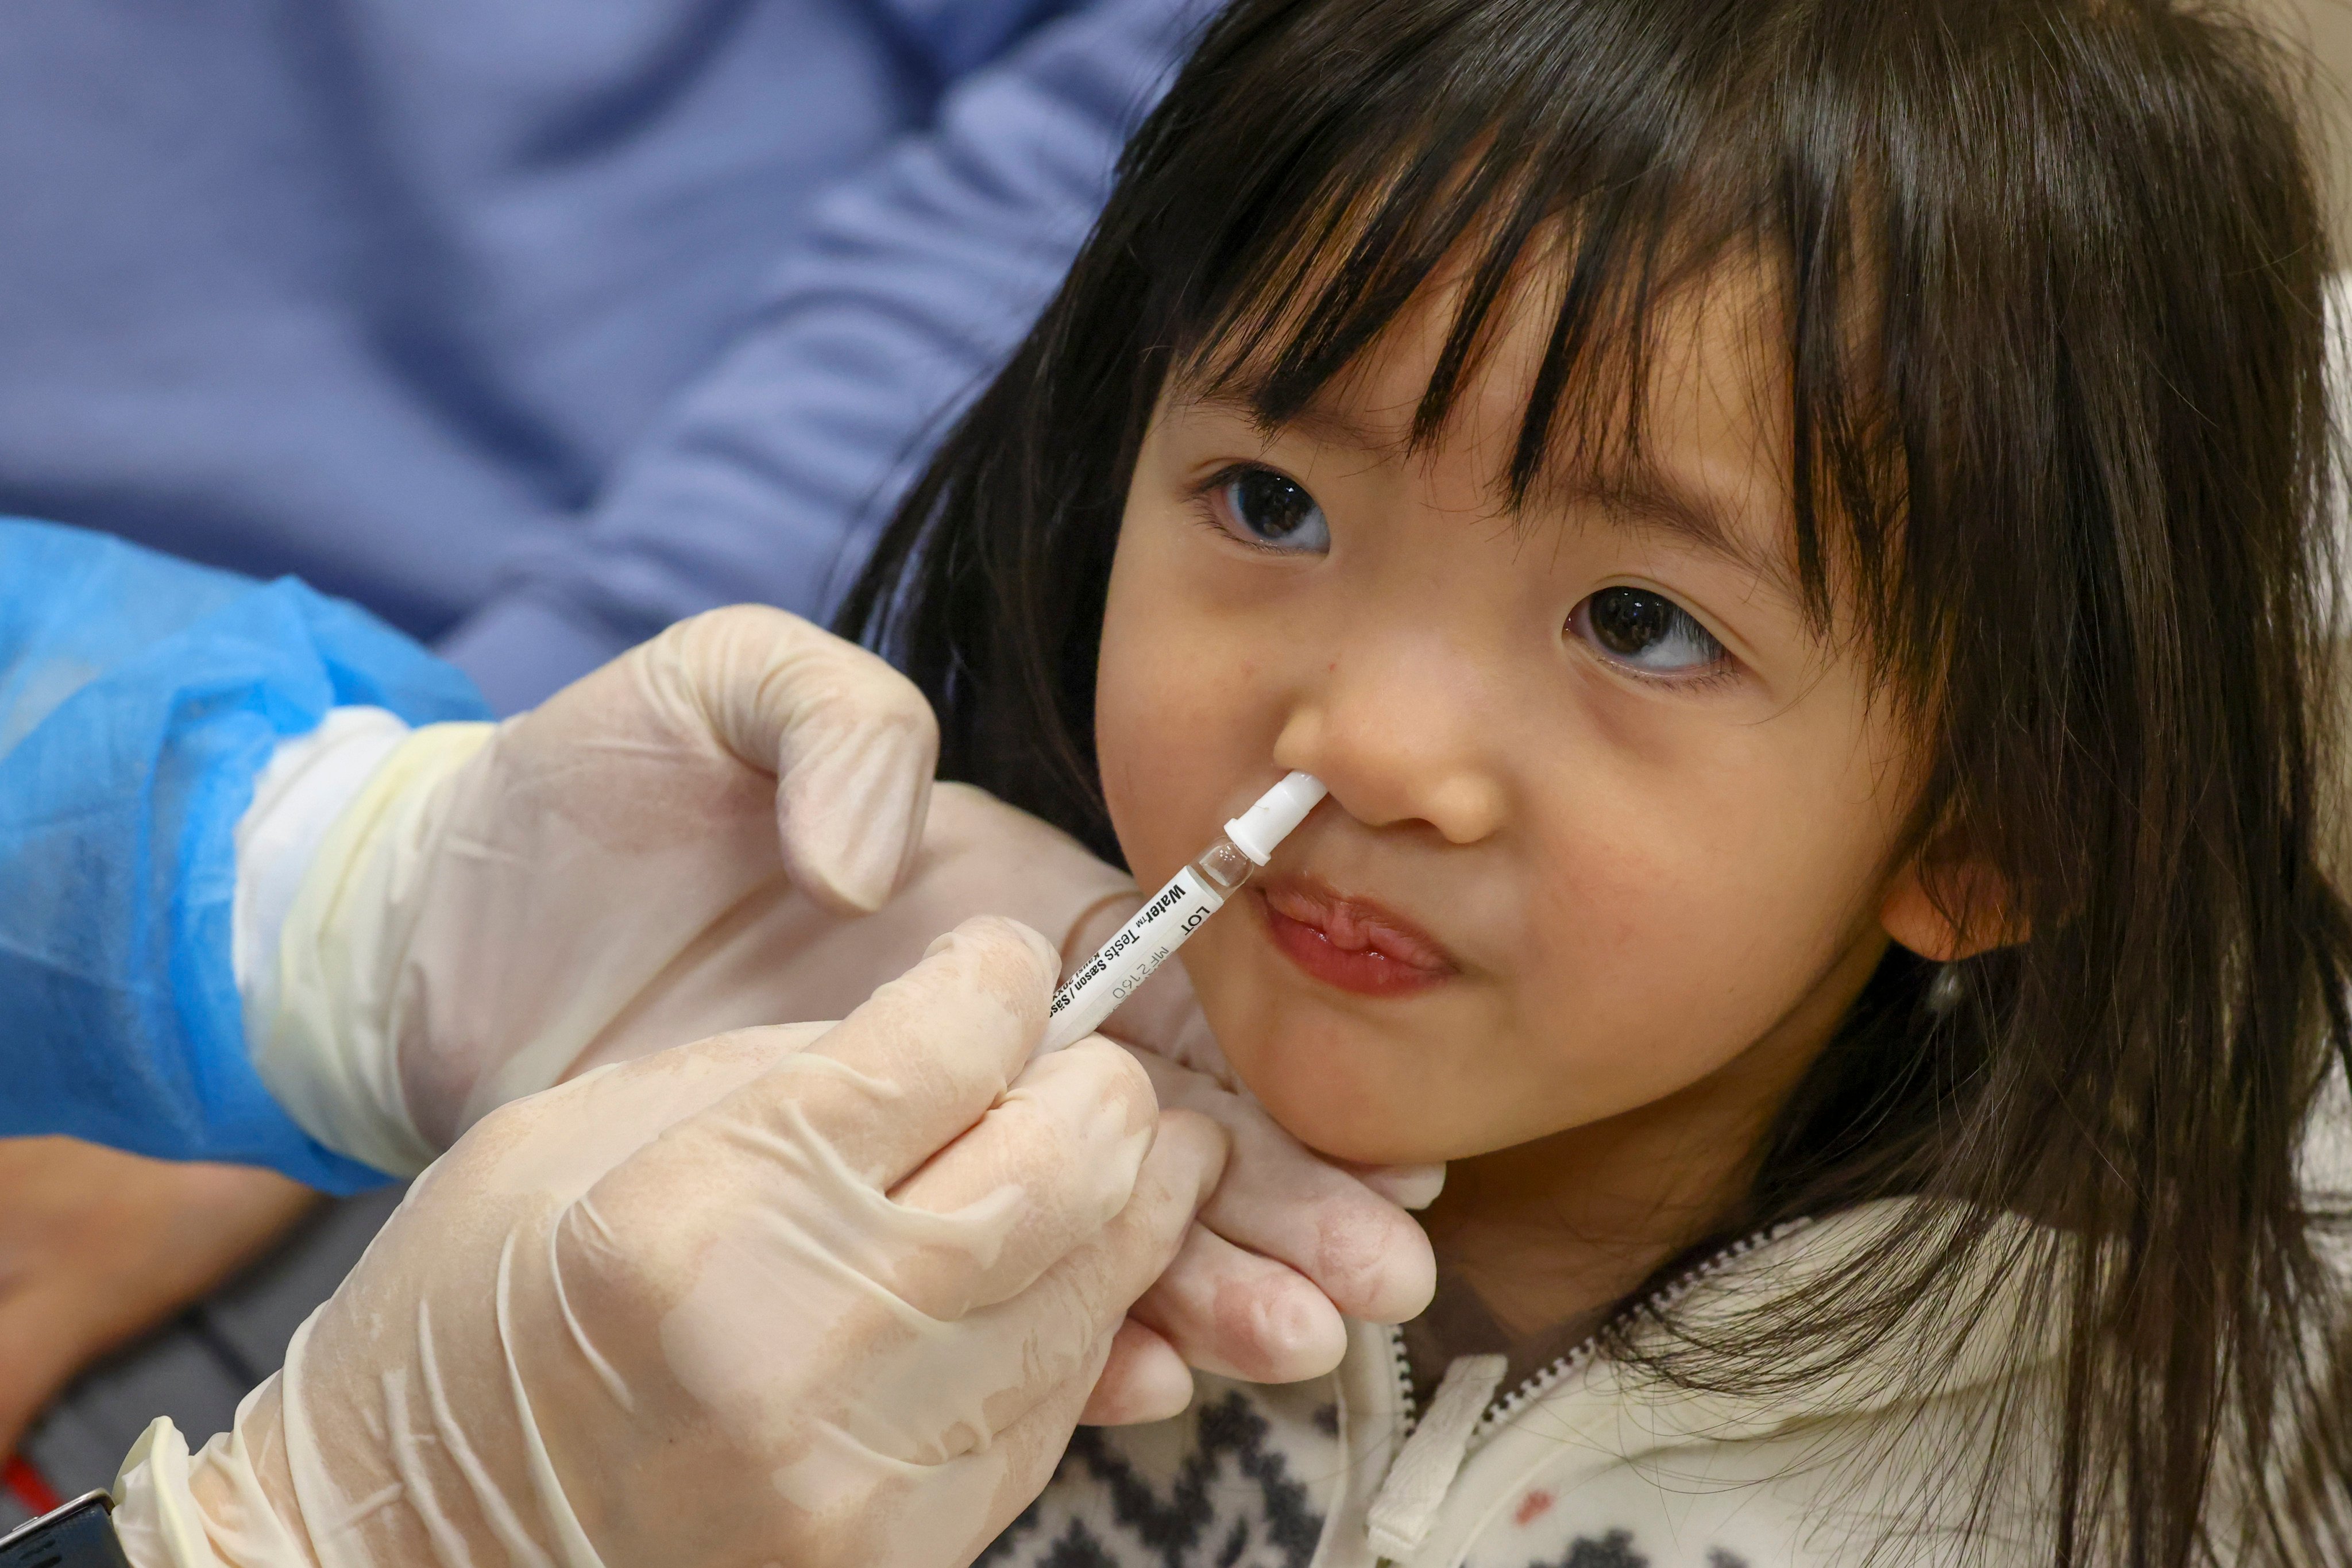 Dr Mike Kwan has said the most effective means of protection against the flu is vaccination. Photo: Dickson Lee